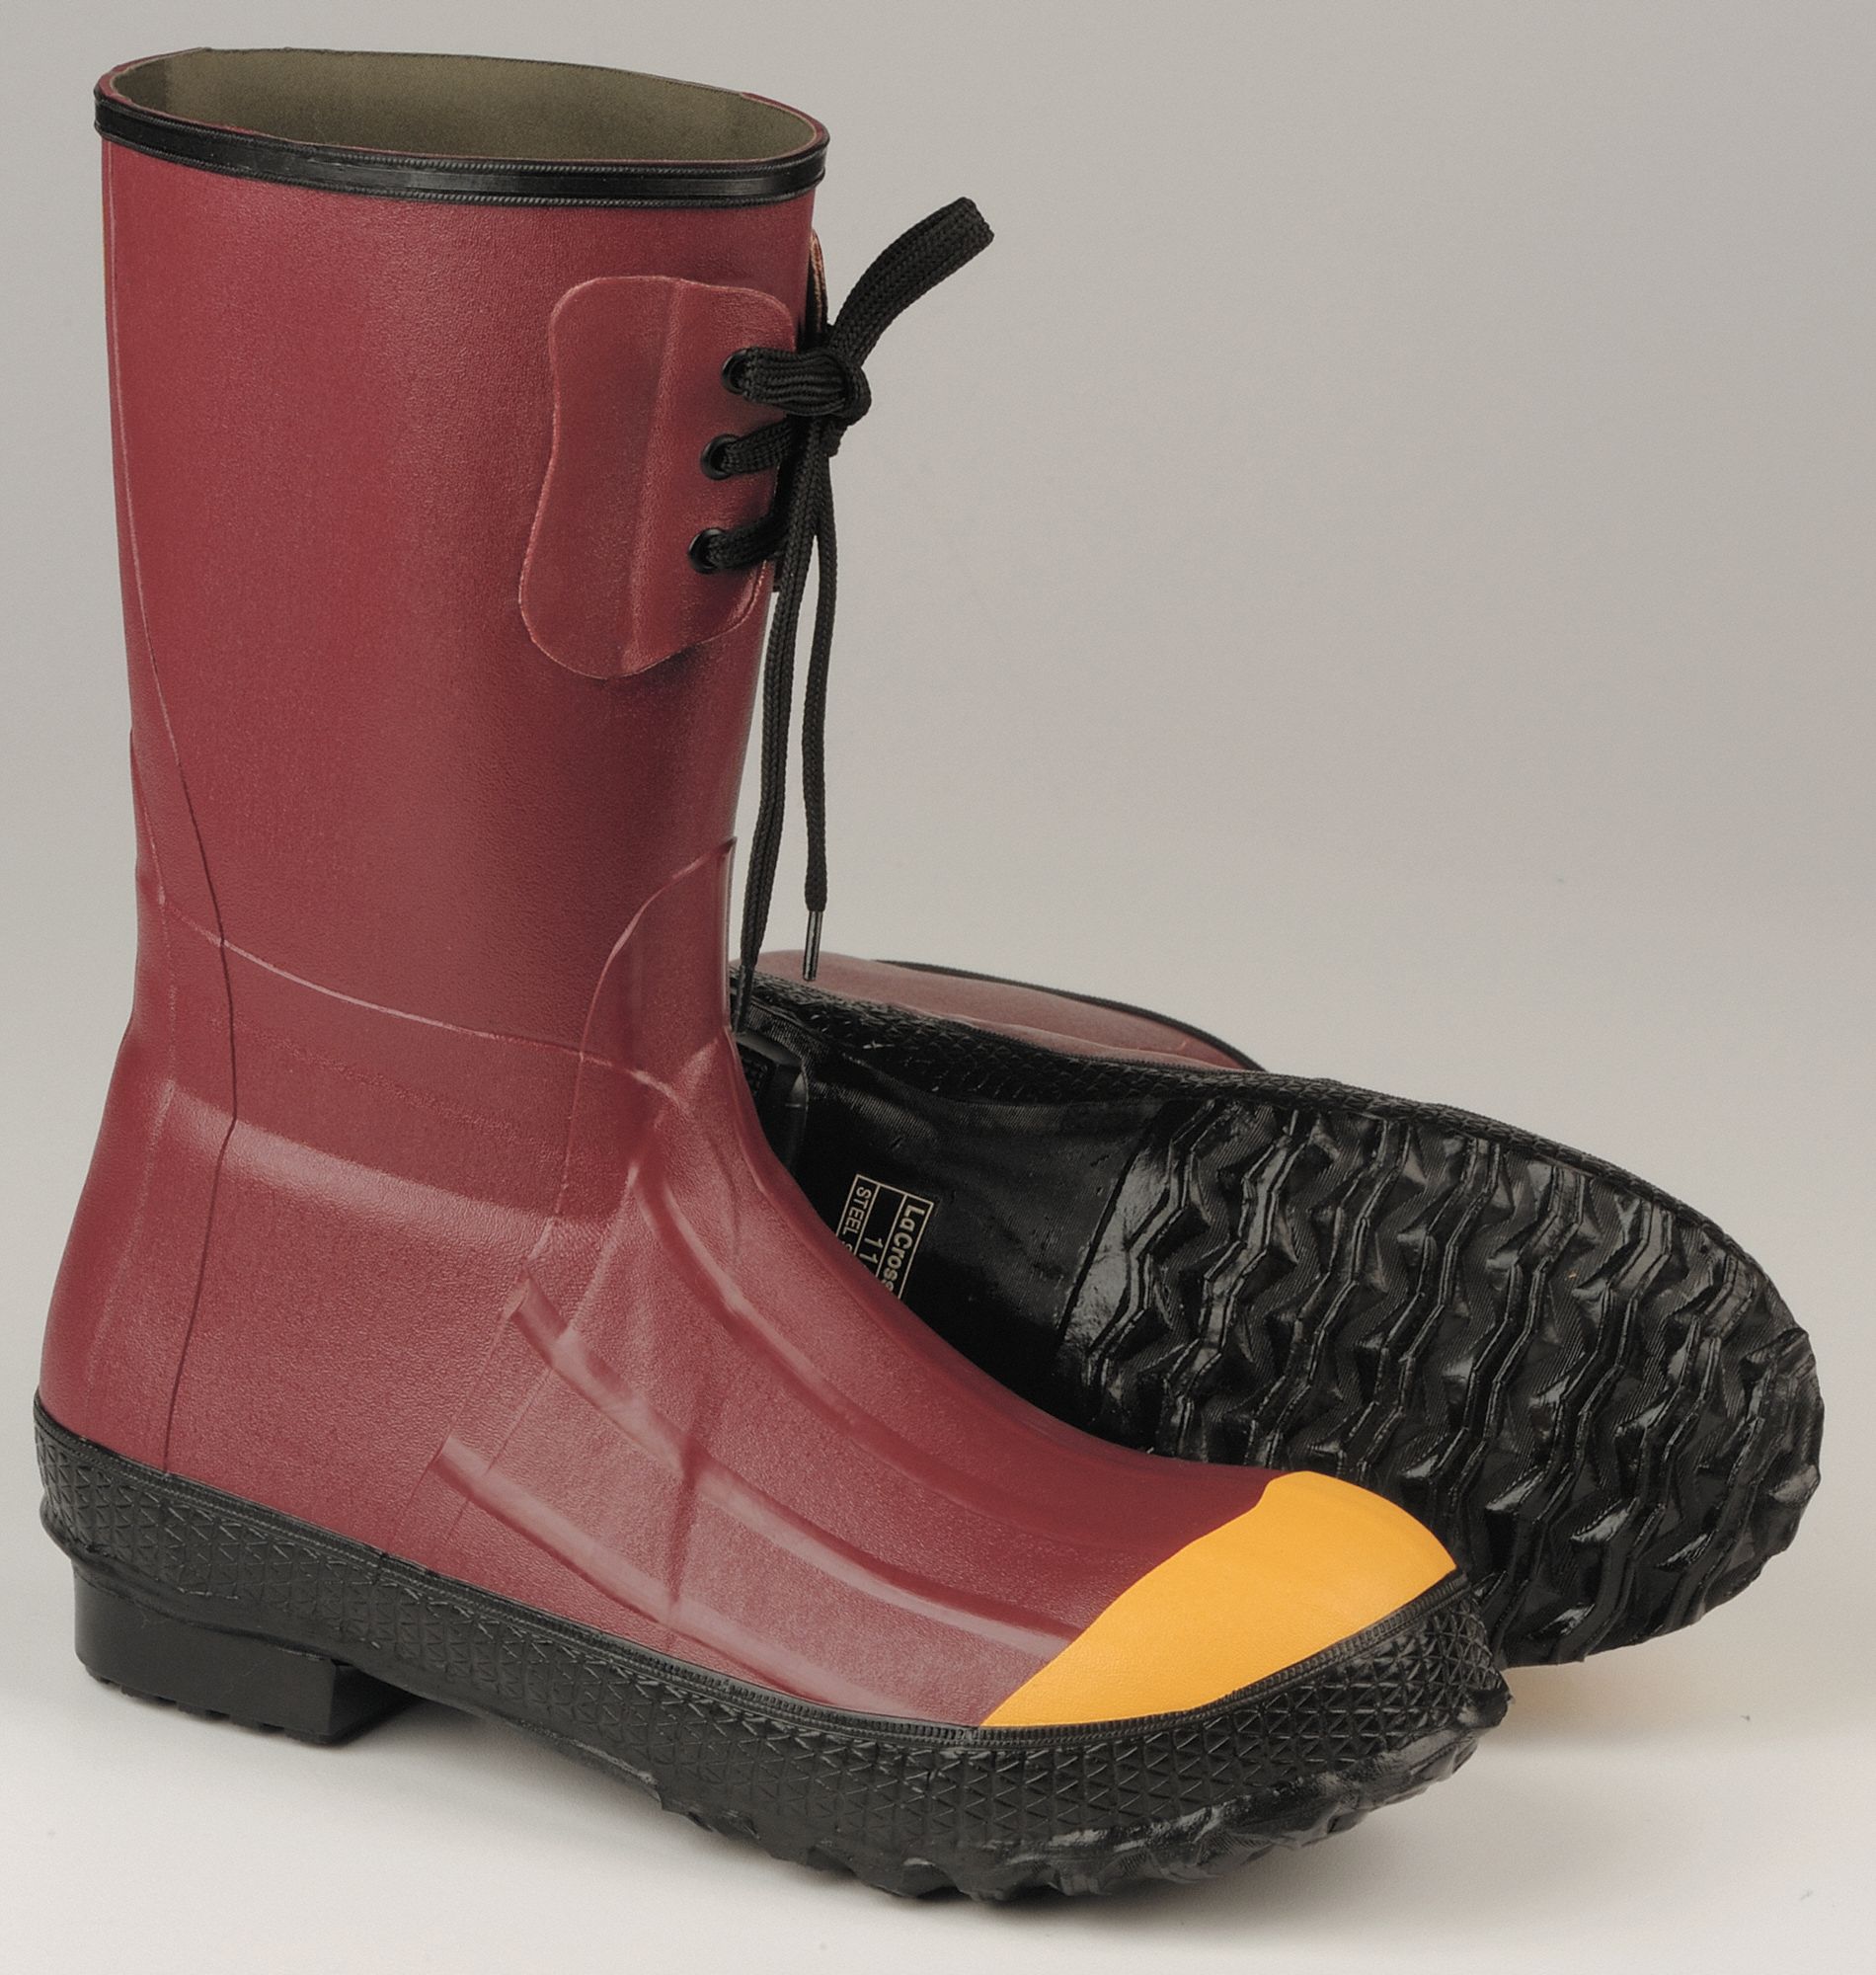 lacrosse safety toe rubber boots